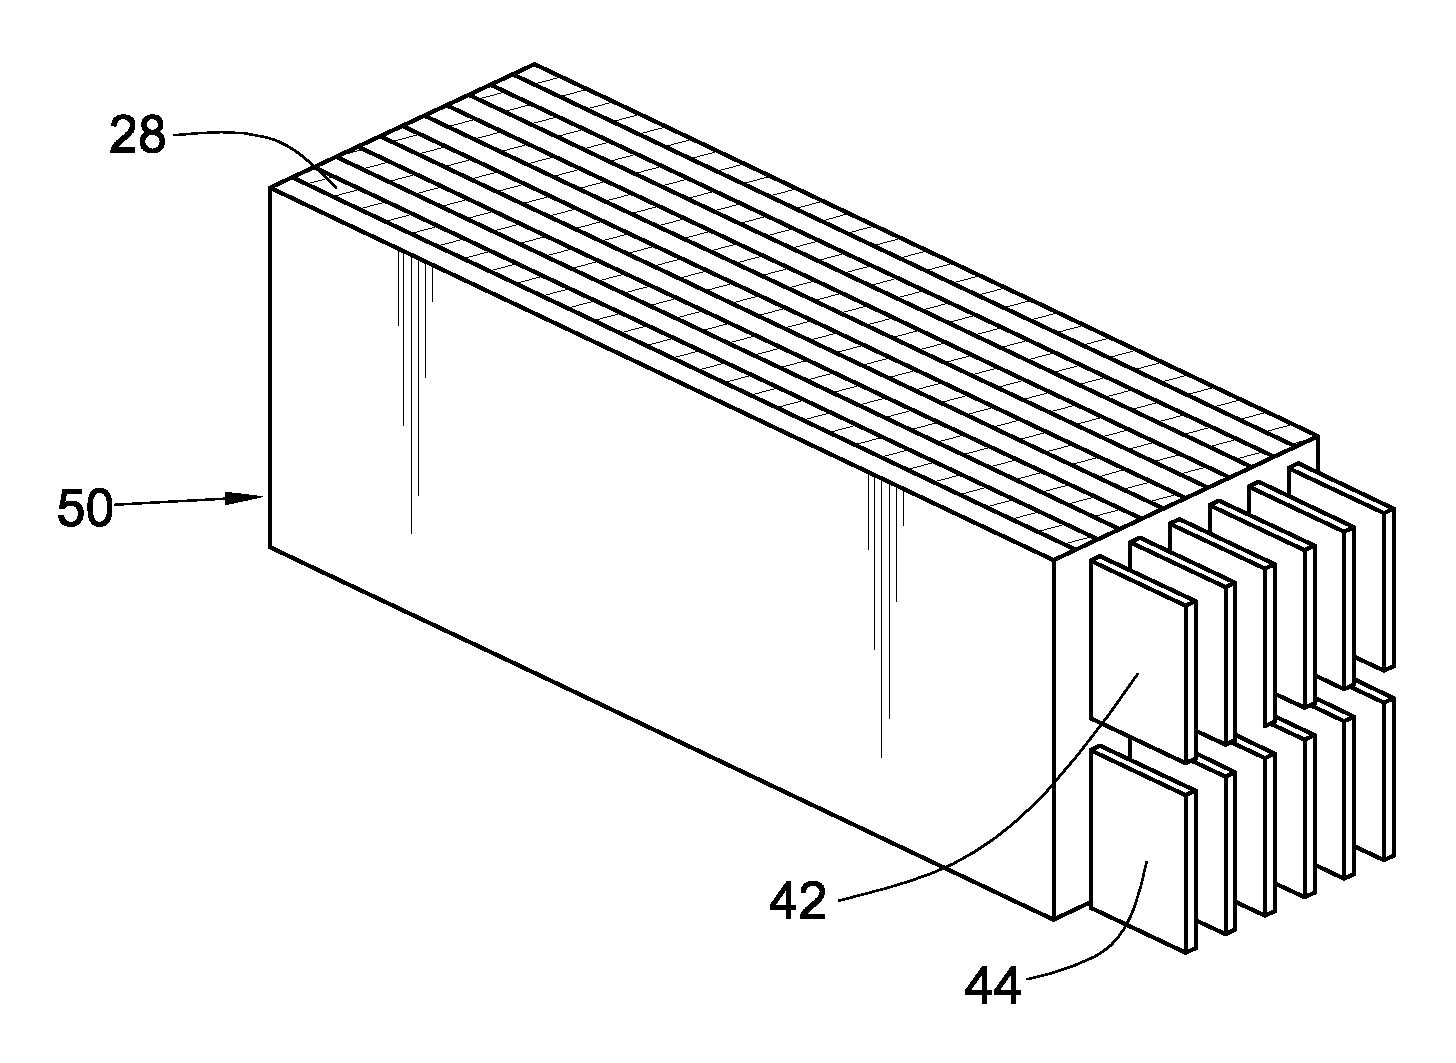 Process for manufacture and assembly of battery modules and sections